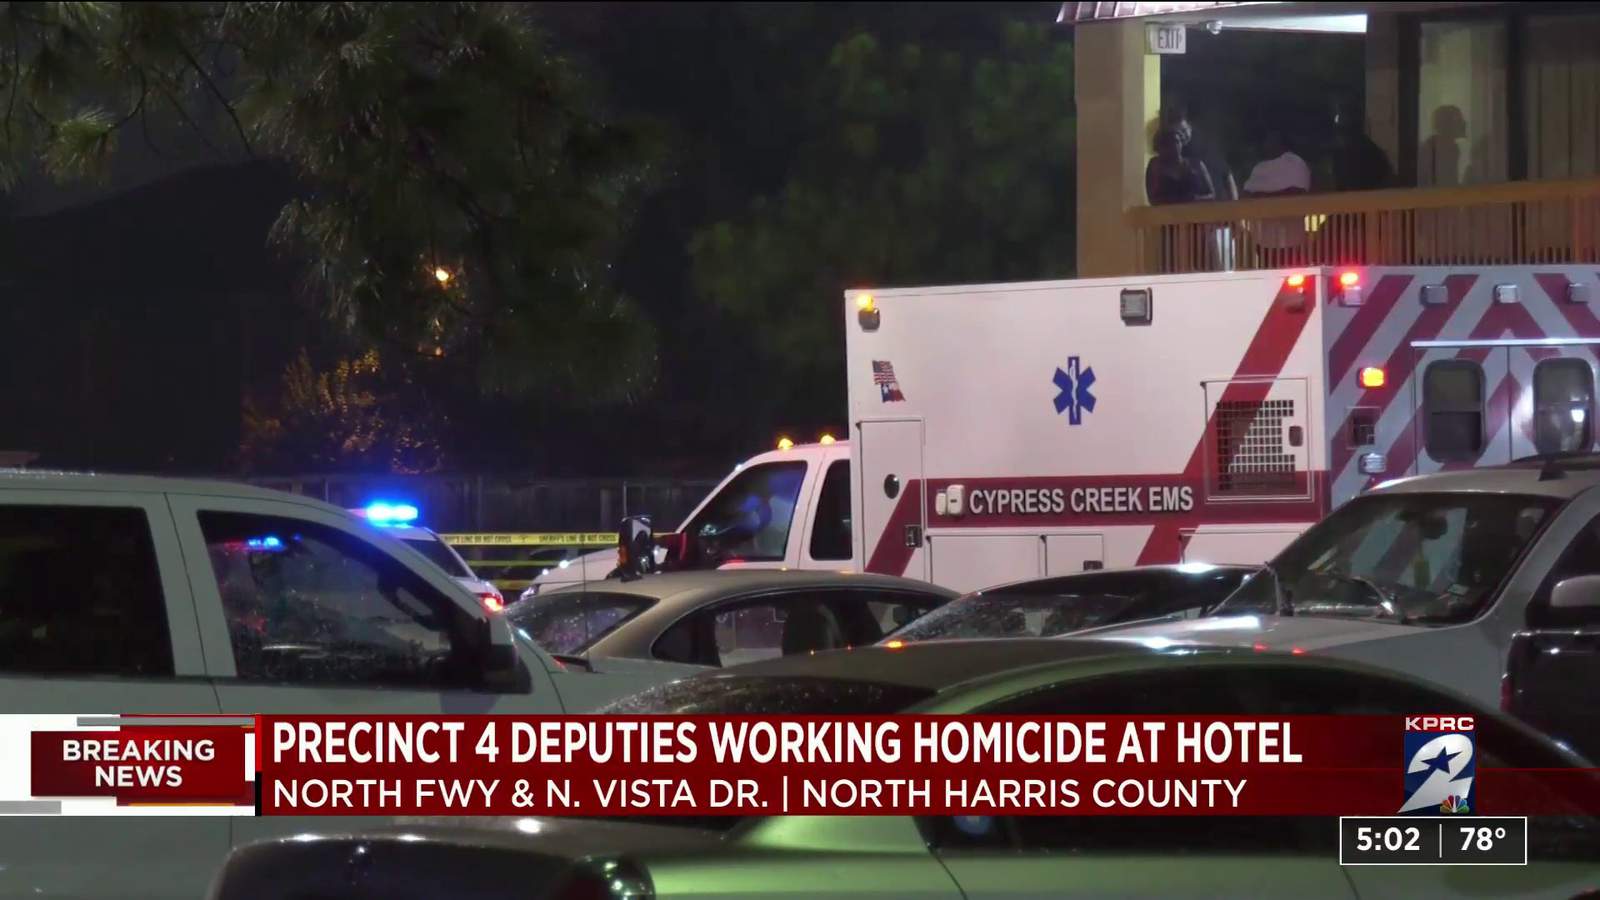 Deputies investigating after person found dead at hotel in N. Harris County: Pct. 4